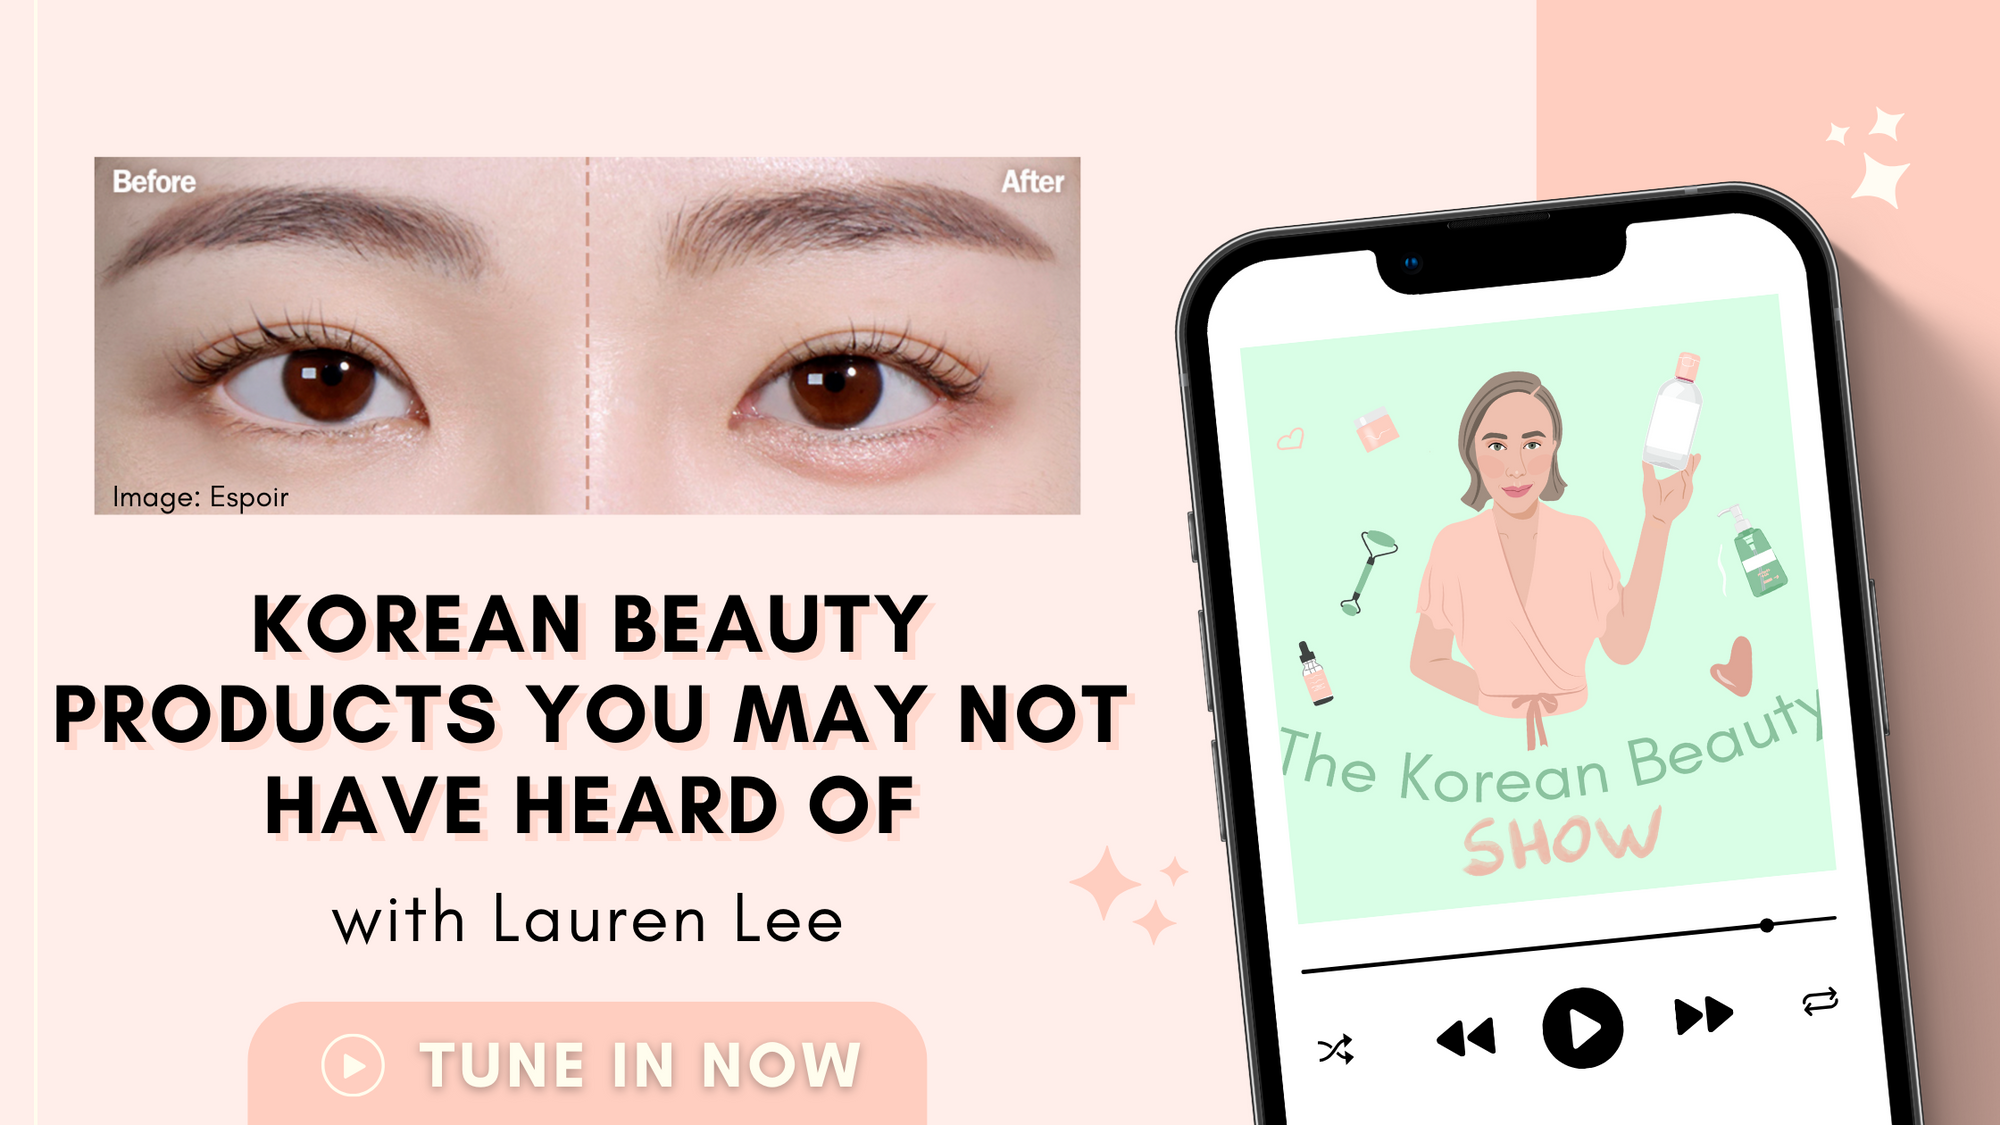 Korean beauty products you may not have heard of